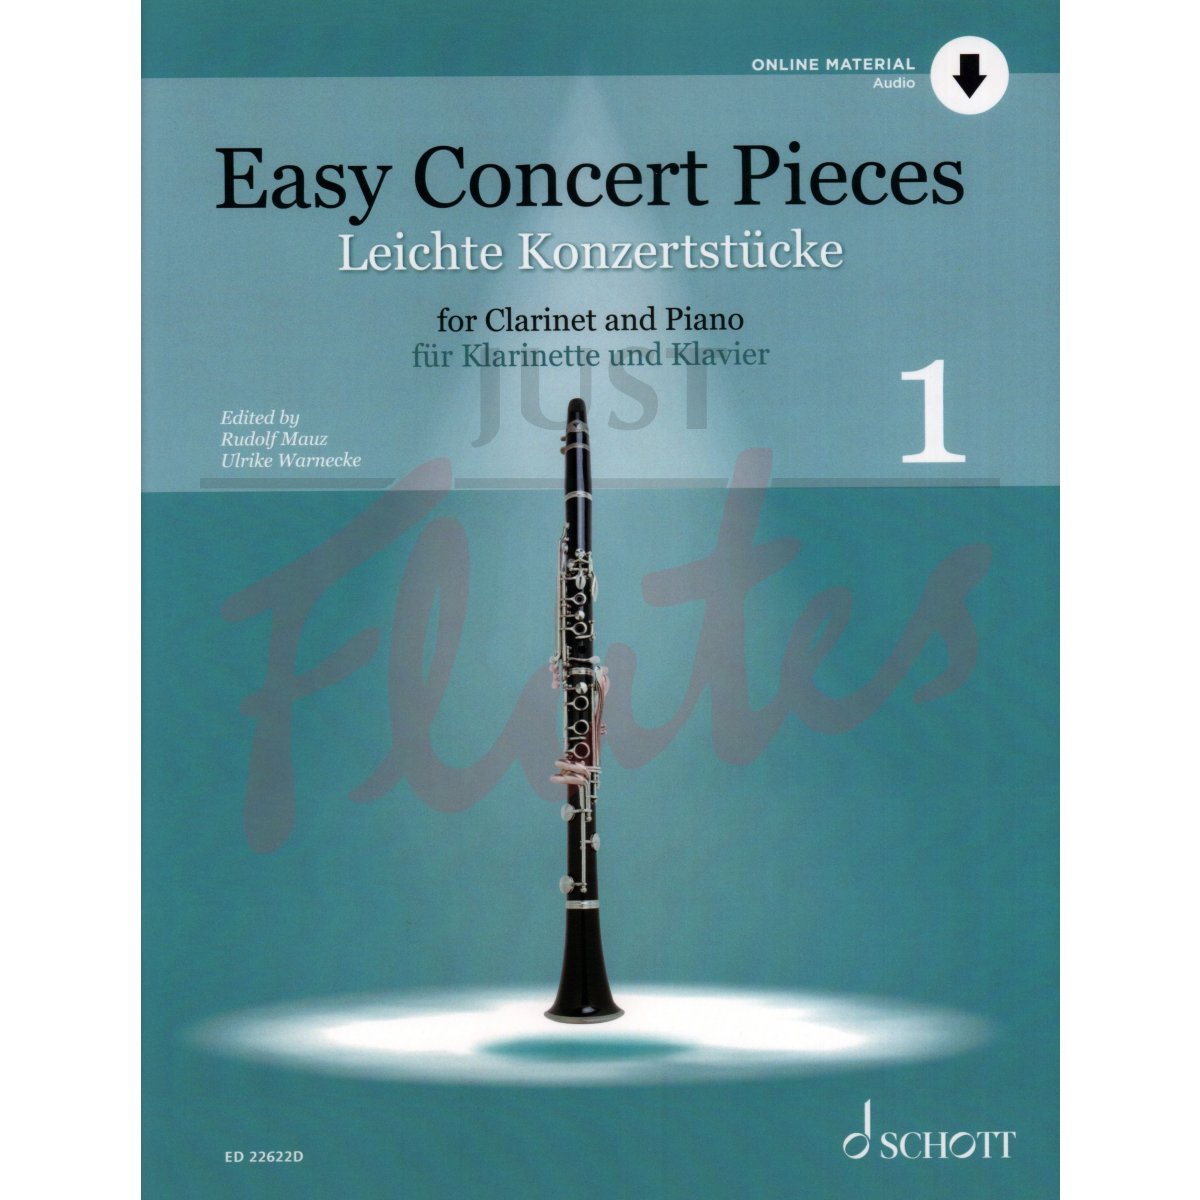 Easy Concert Pieces for Clarinet and Piano, Vol. 1